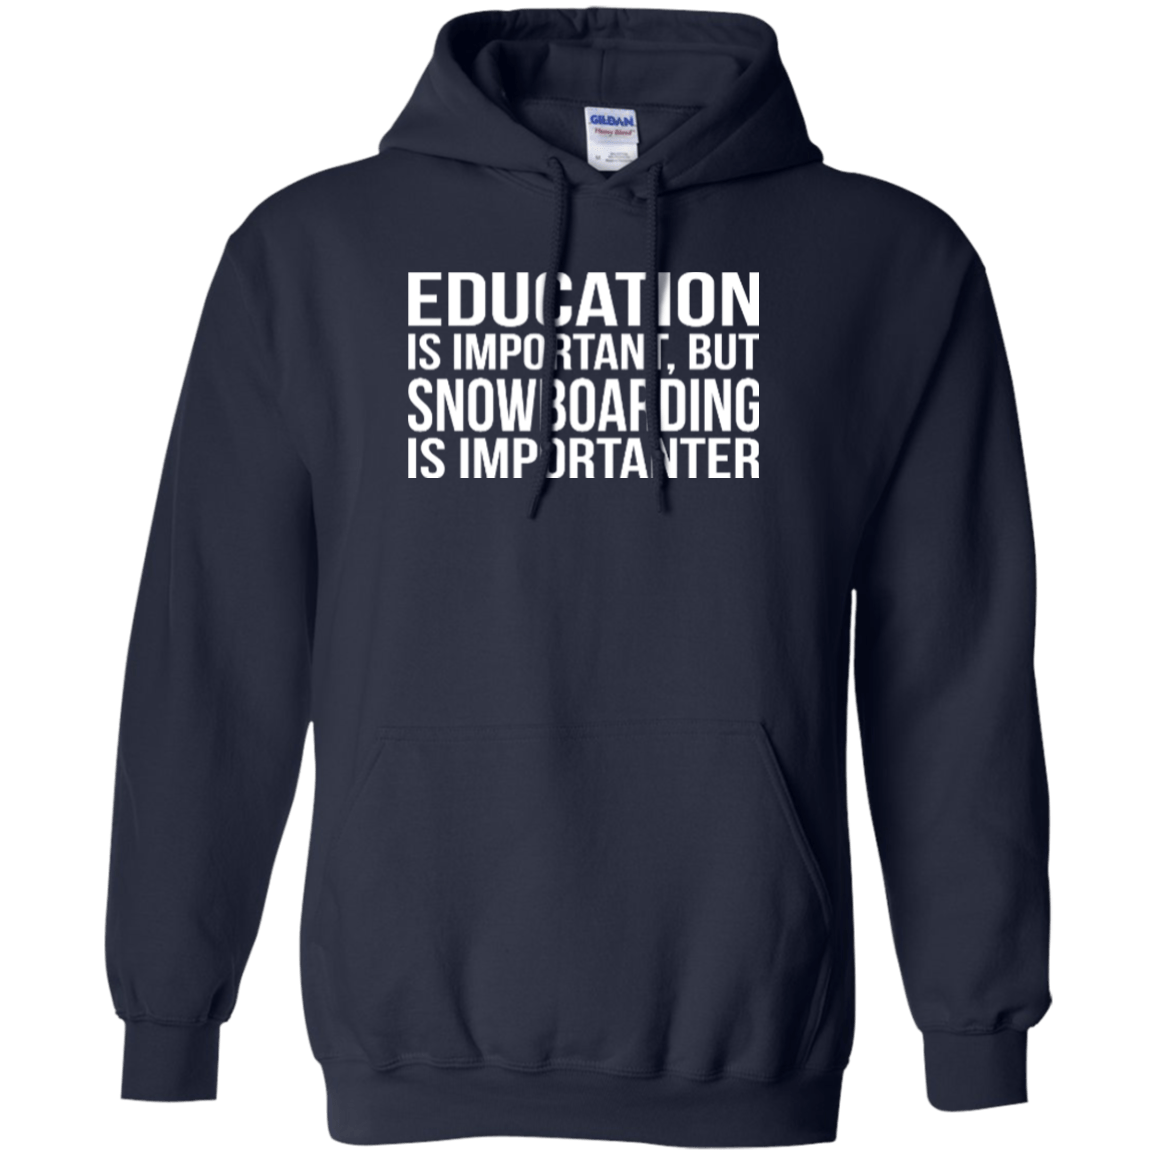 Education Is Important But Snowboarding Is Importanter Hoodies - Powderaddicts